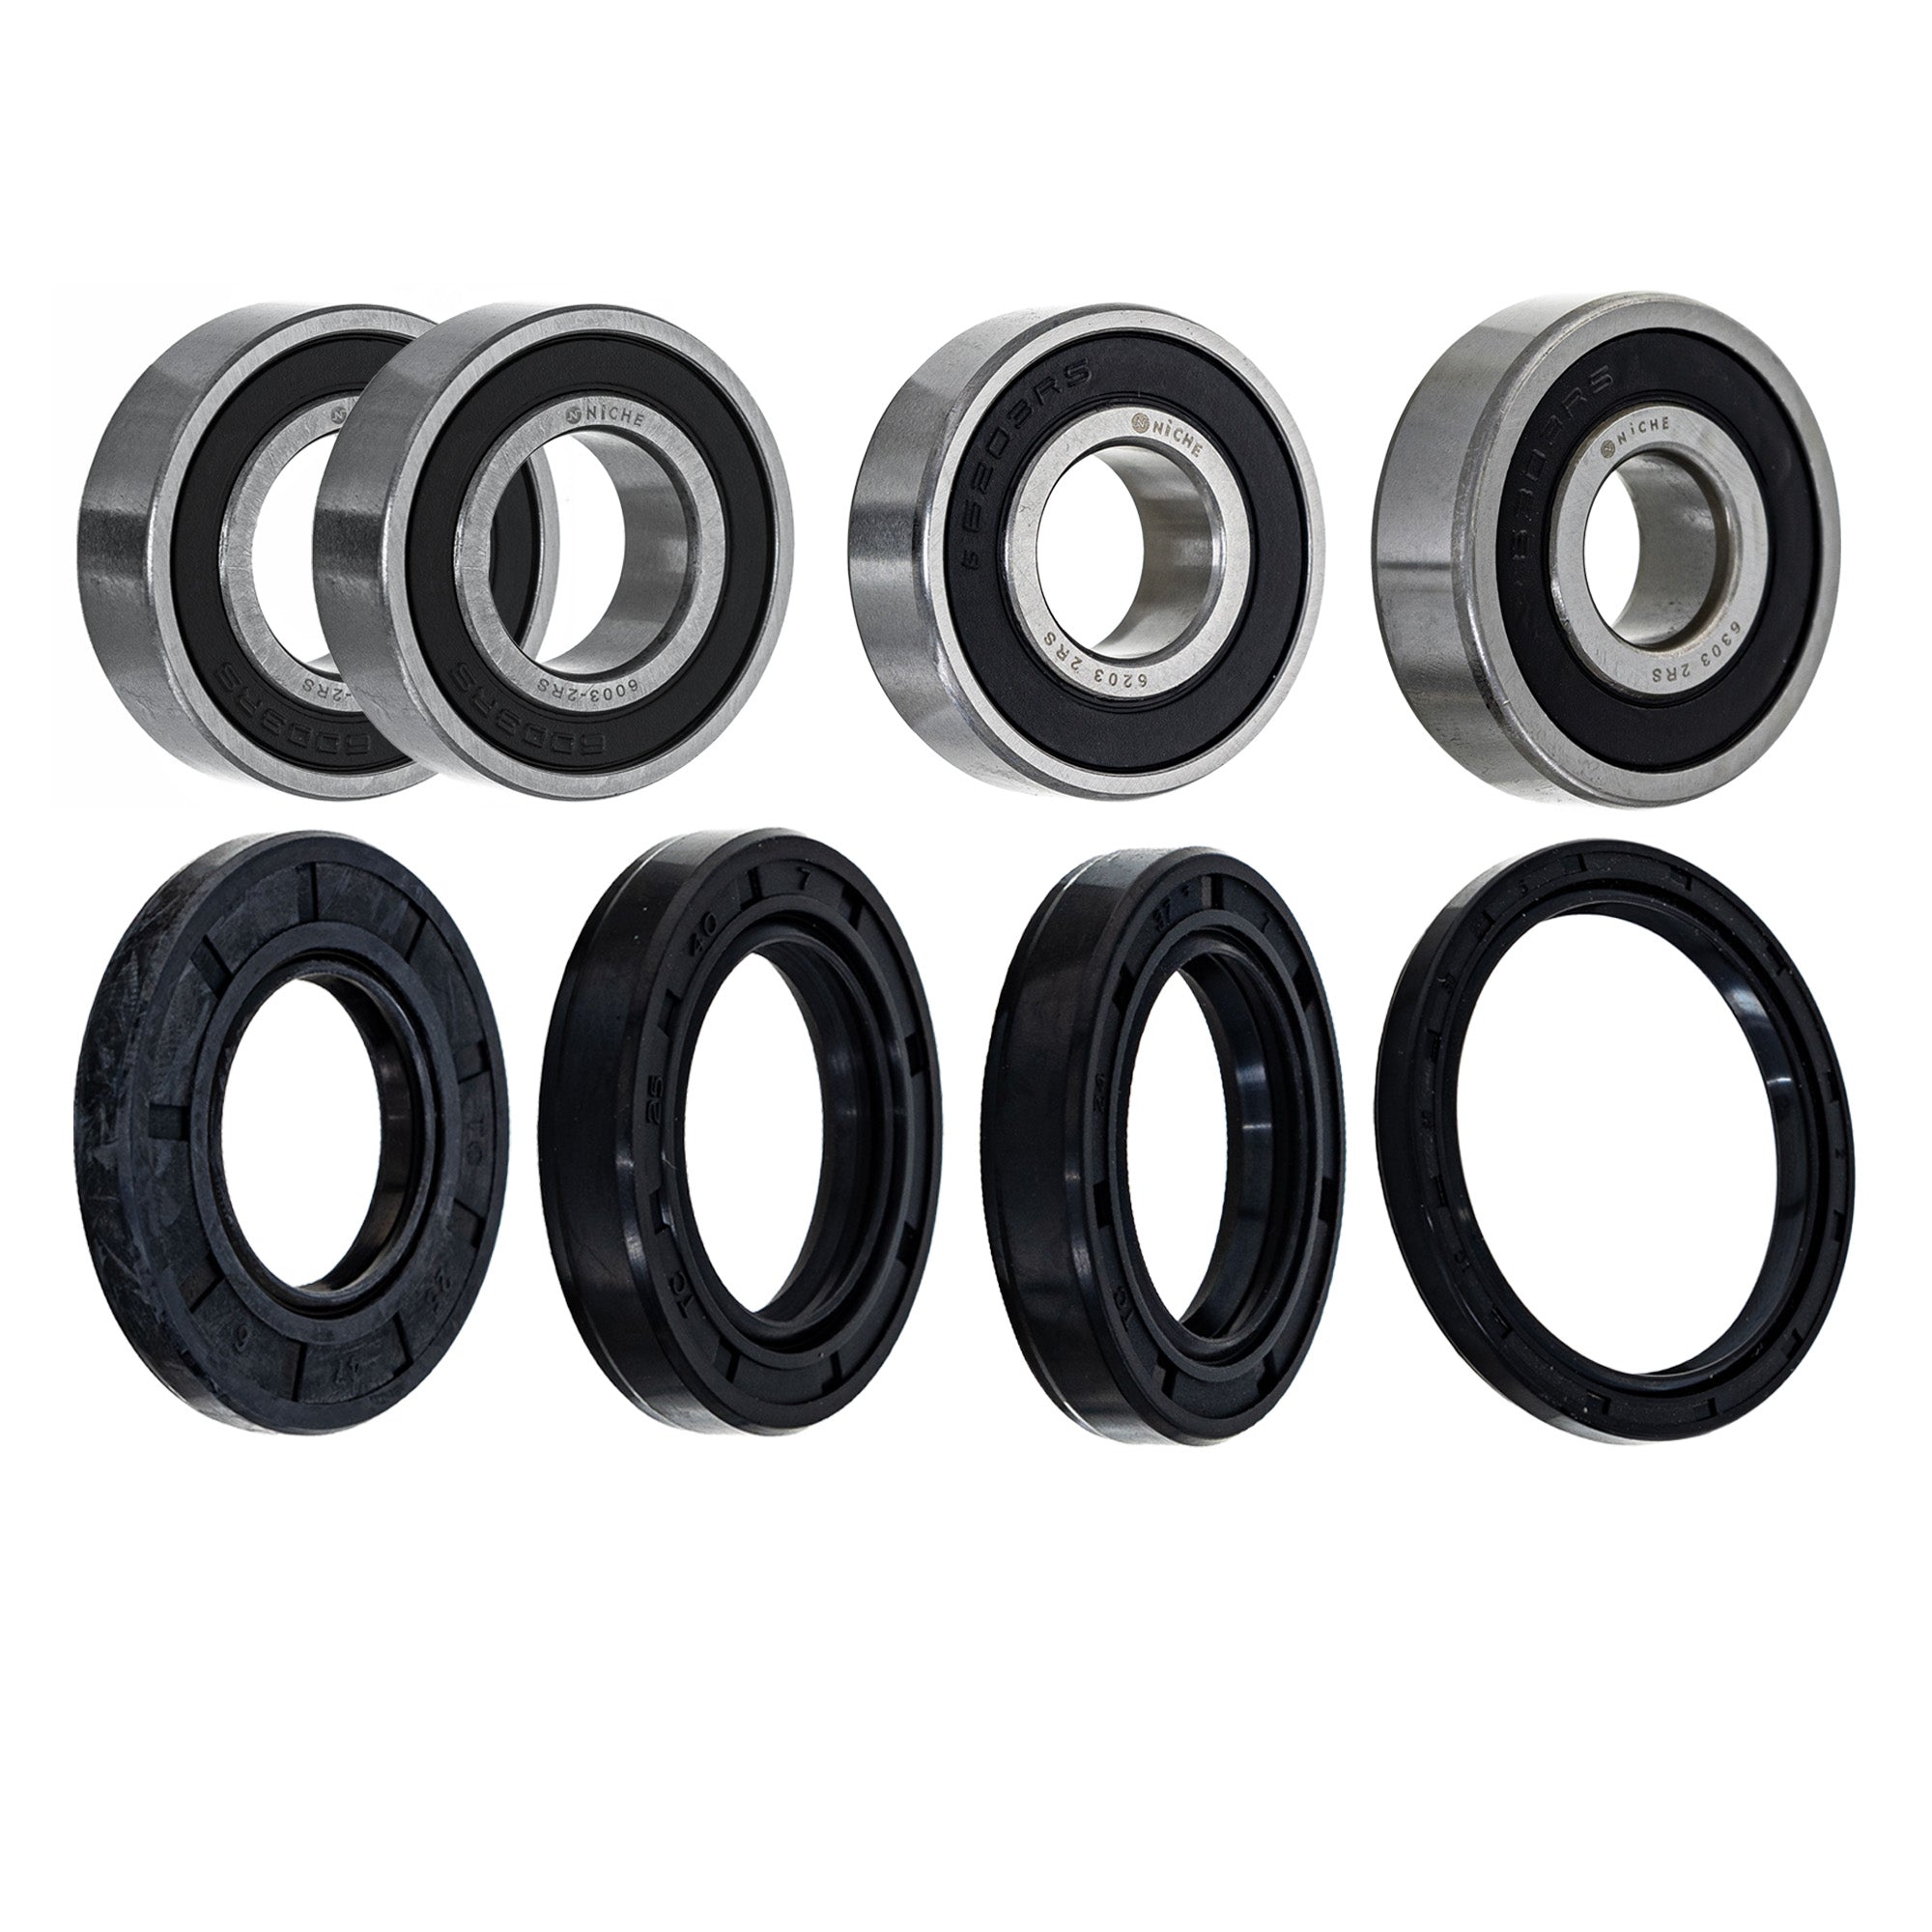 Wheel Bearing Seal Kit for zOTHER Ref No XR400R NICHE MK1008815